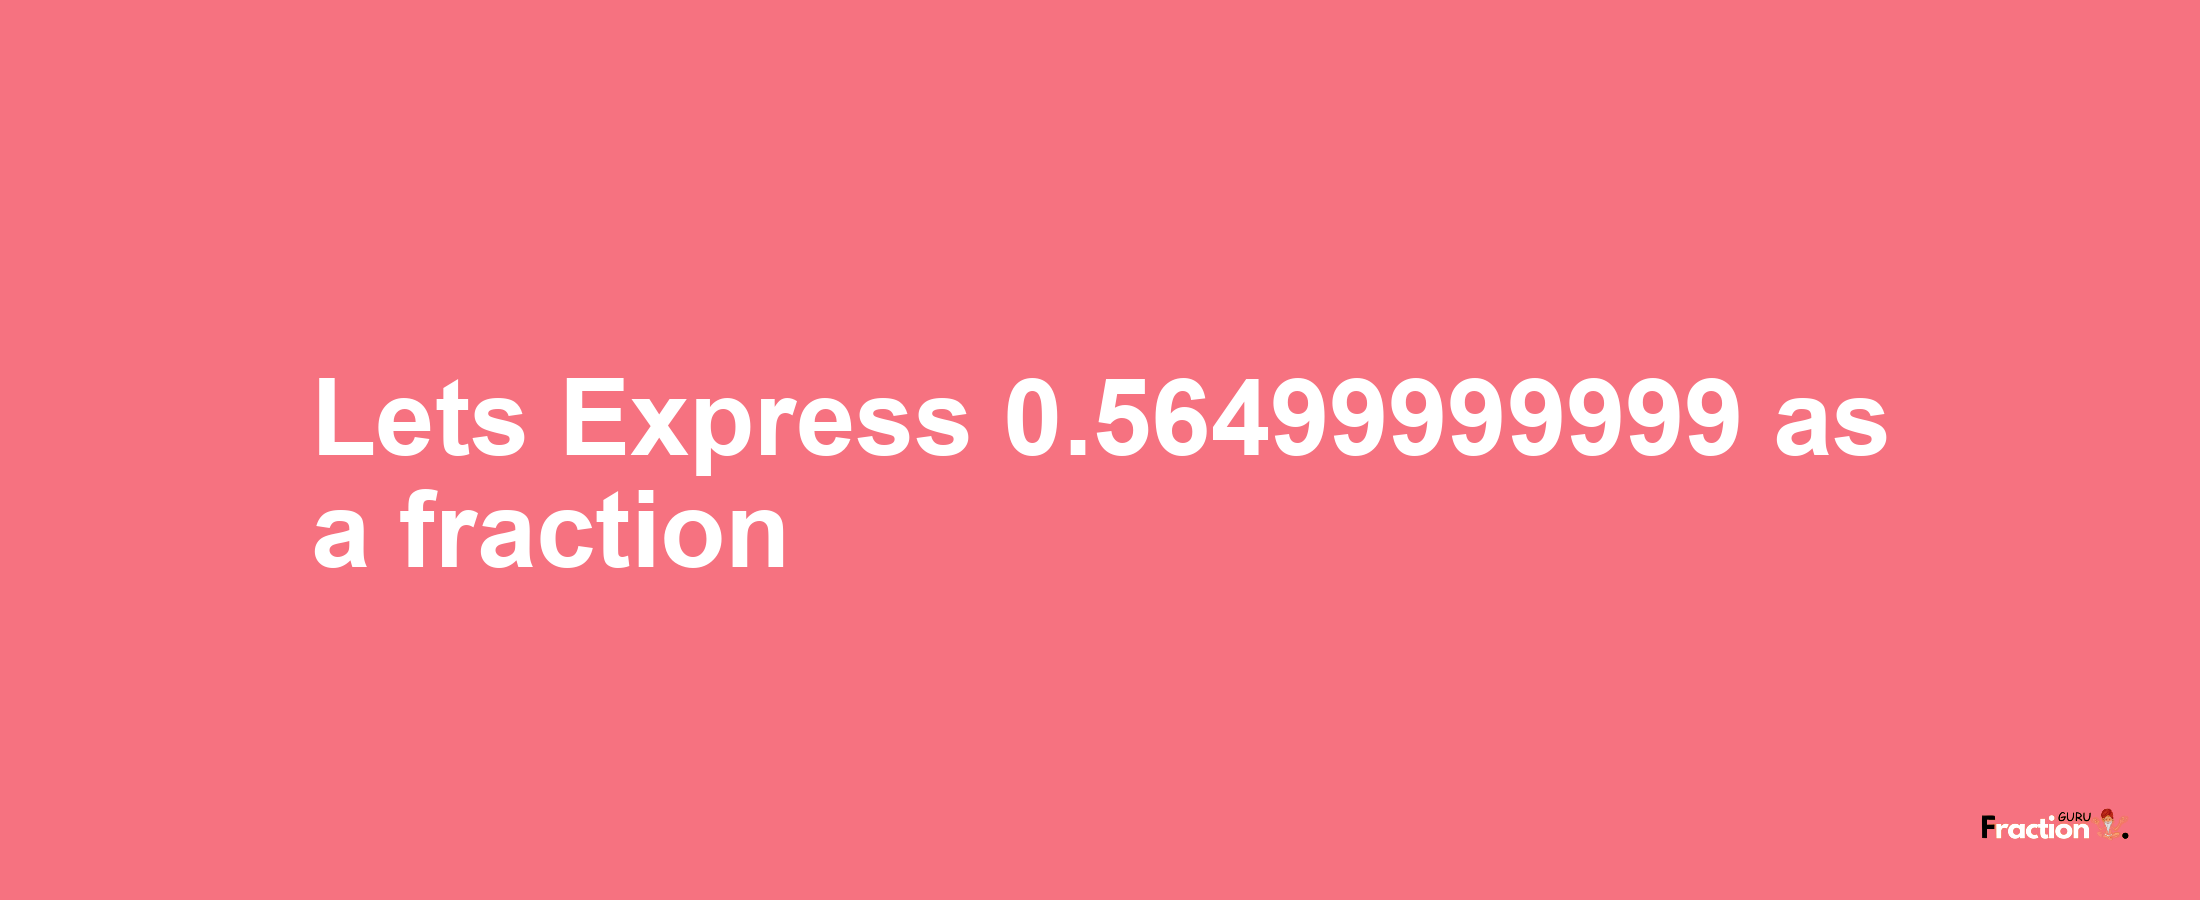 Lets Express 0.56499999999 as afraction